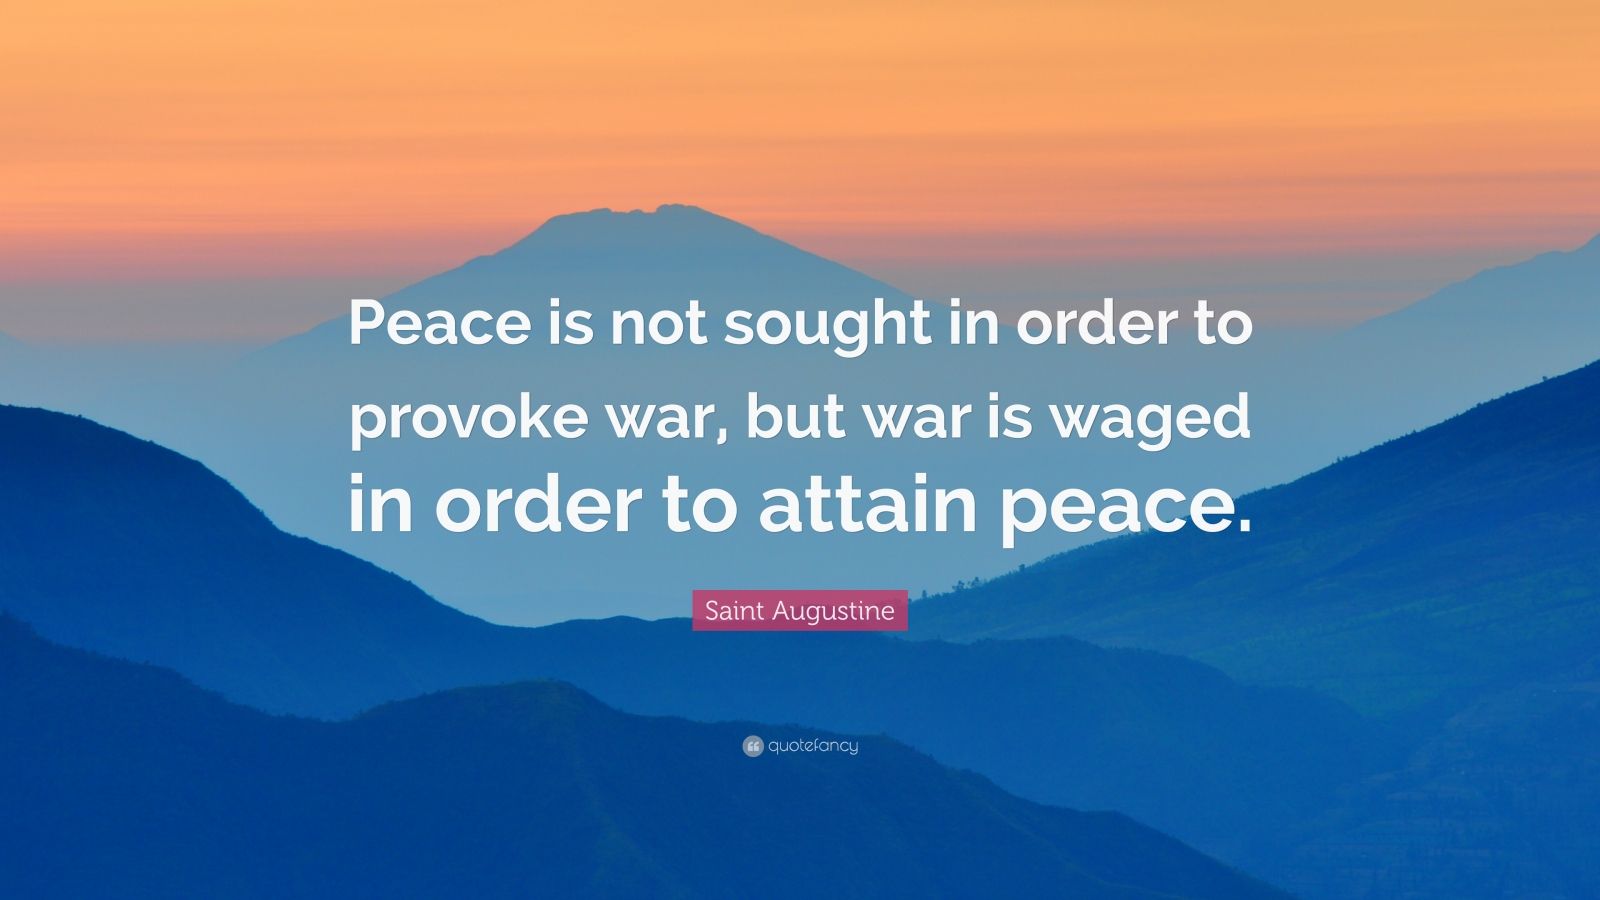 Saint Augustine Quote: “Peace is not sought in order to provoke war ...